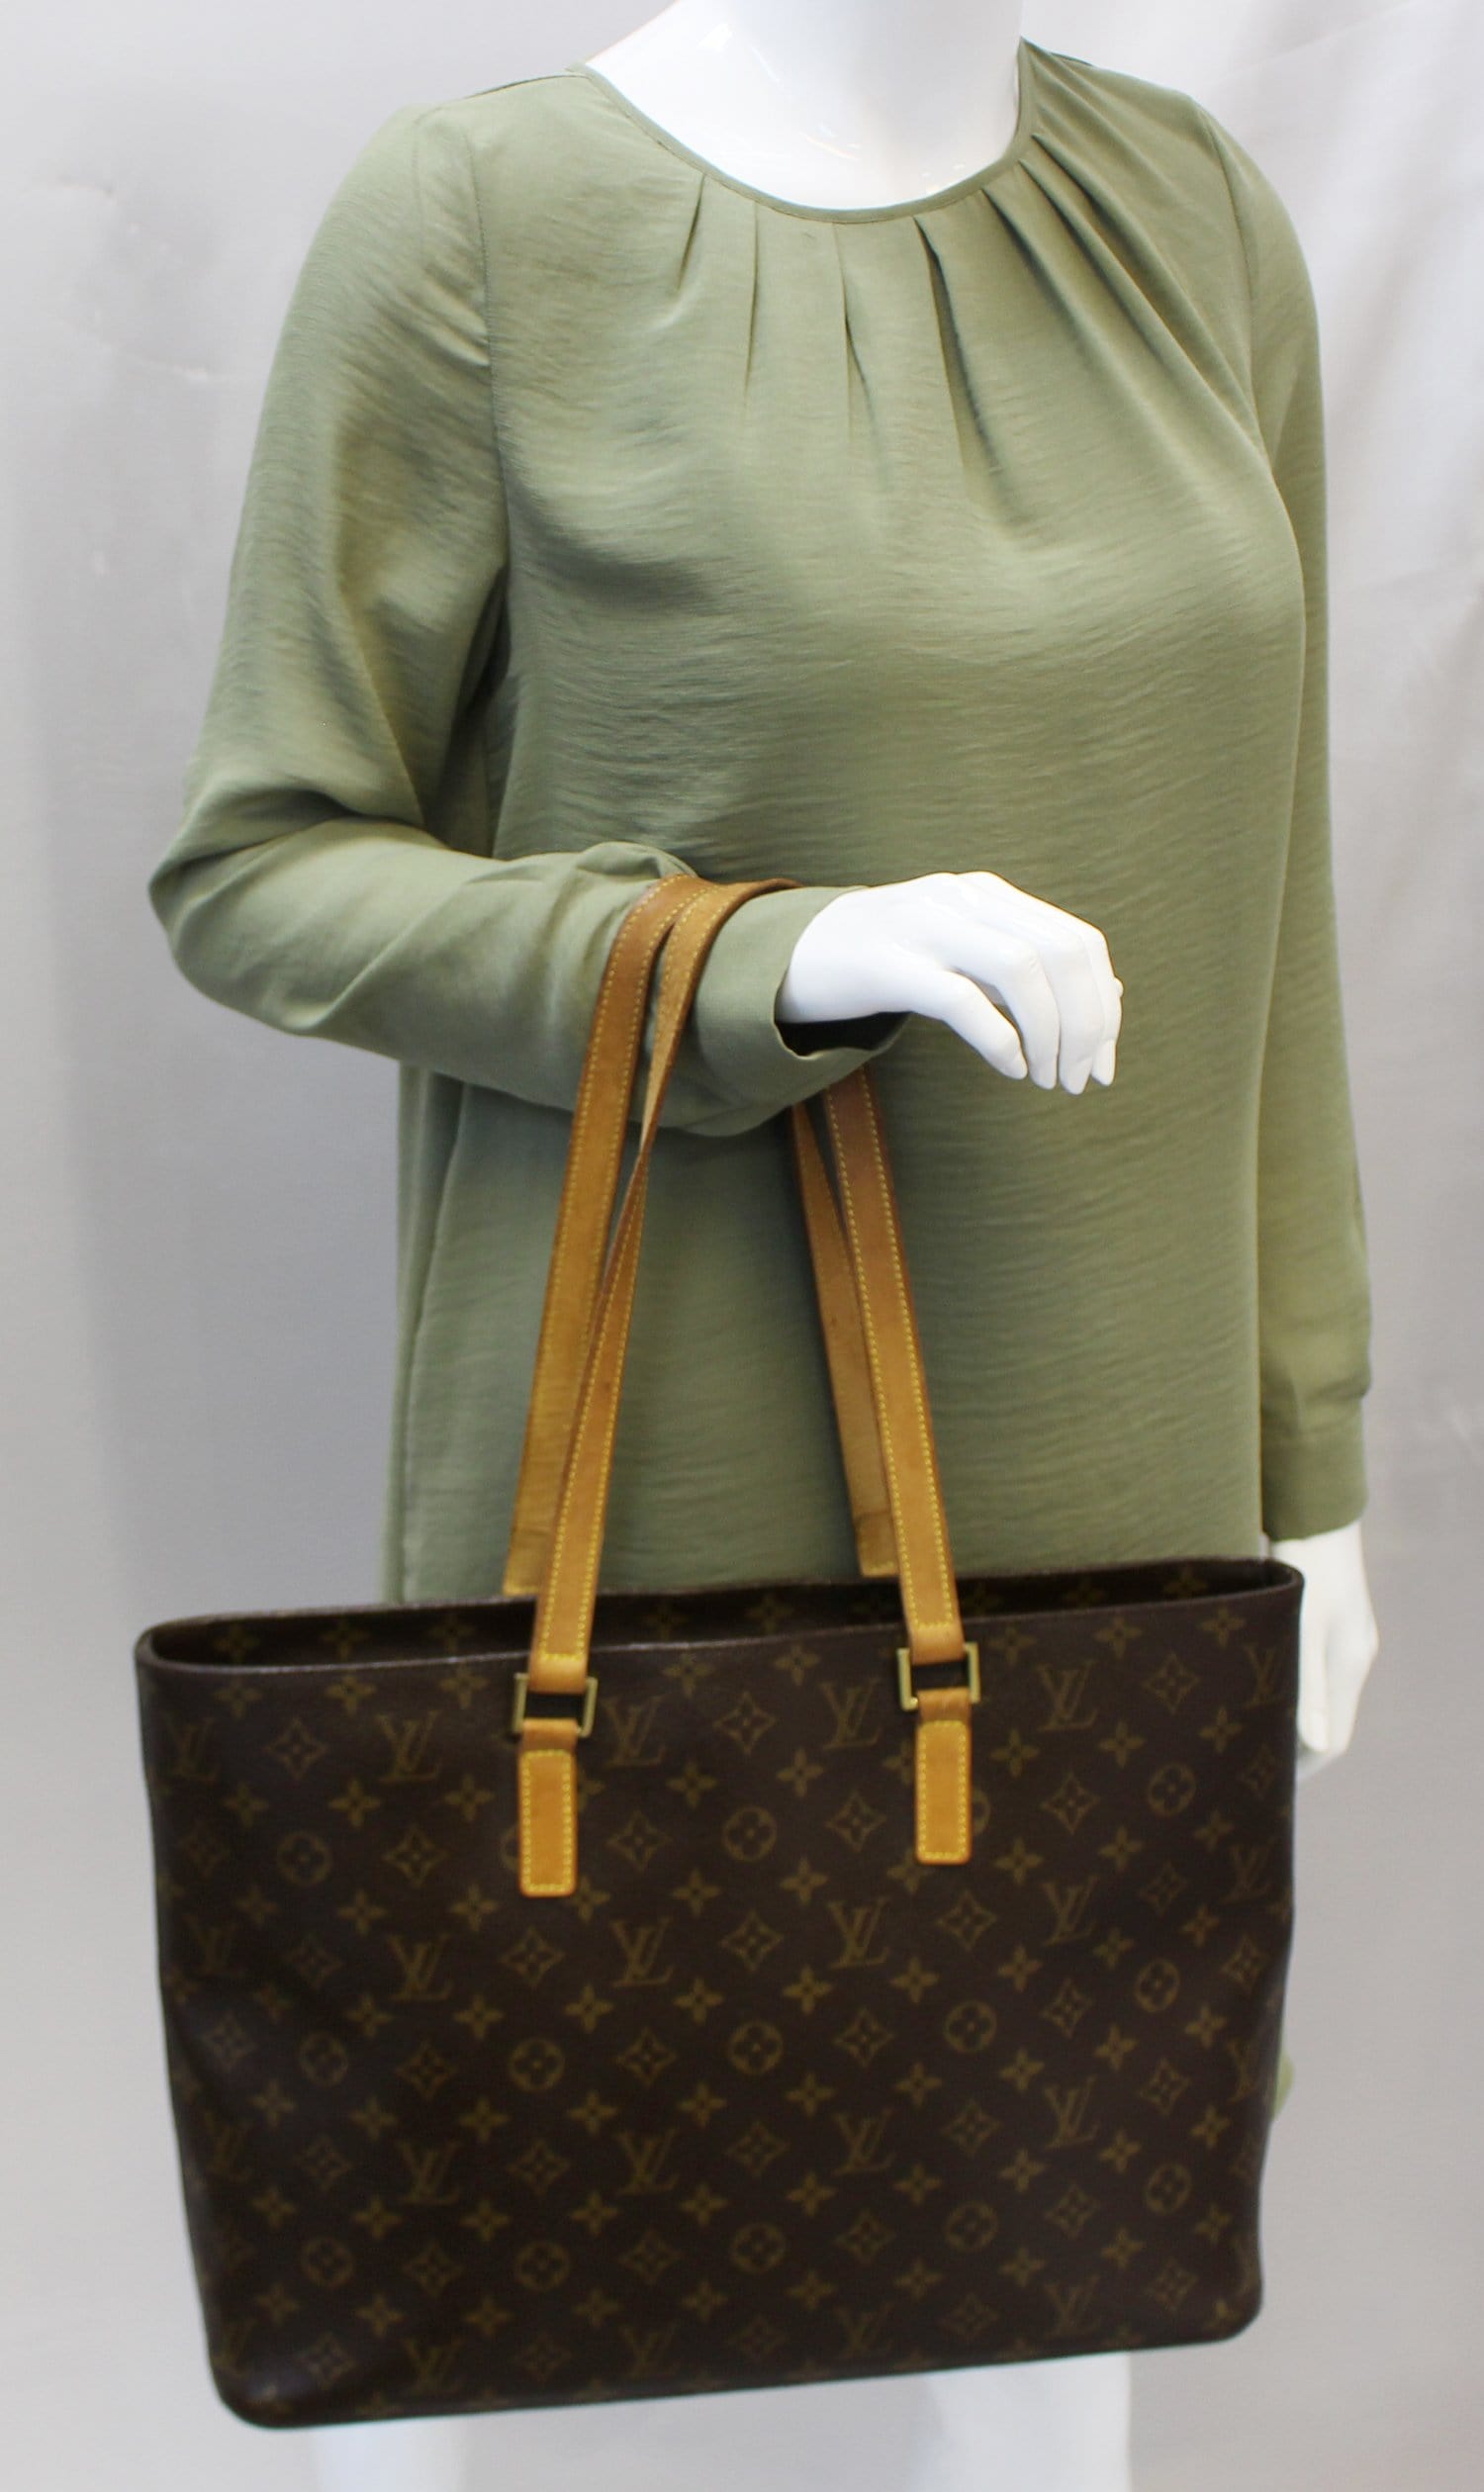 LOUIS VUITTON Luco Used Tote Shoulder Bag Monogram Leather M51155